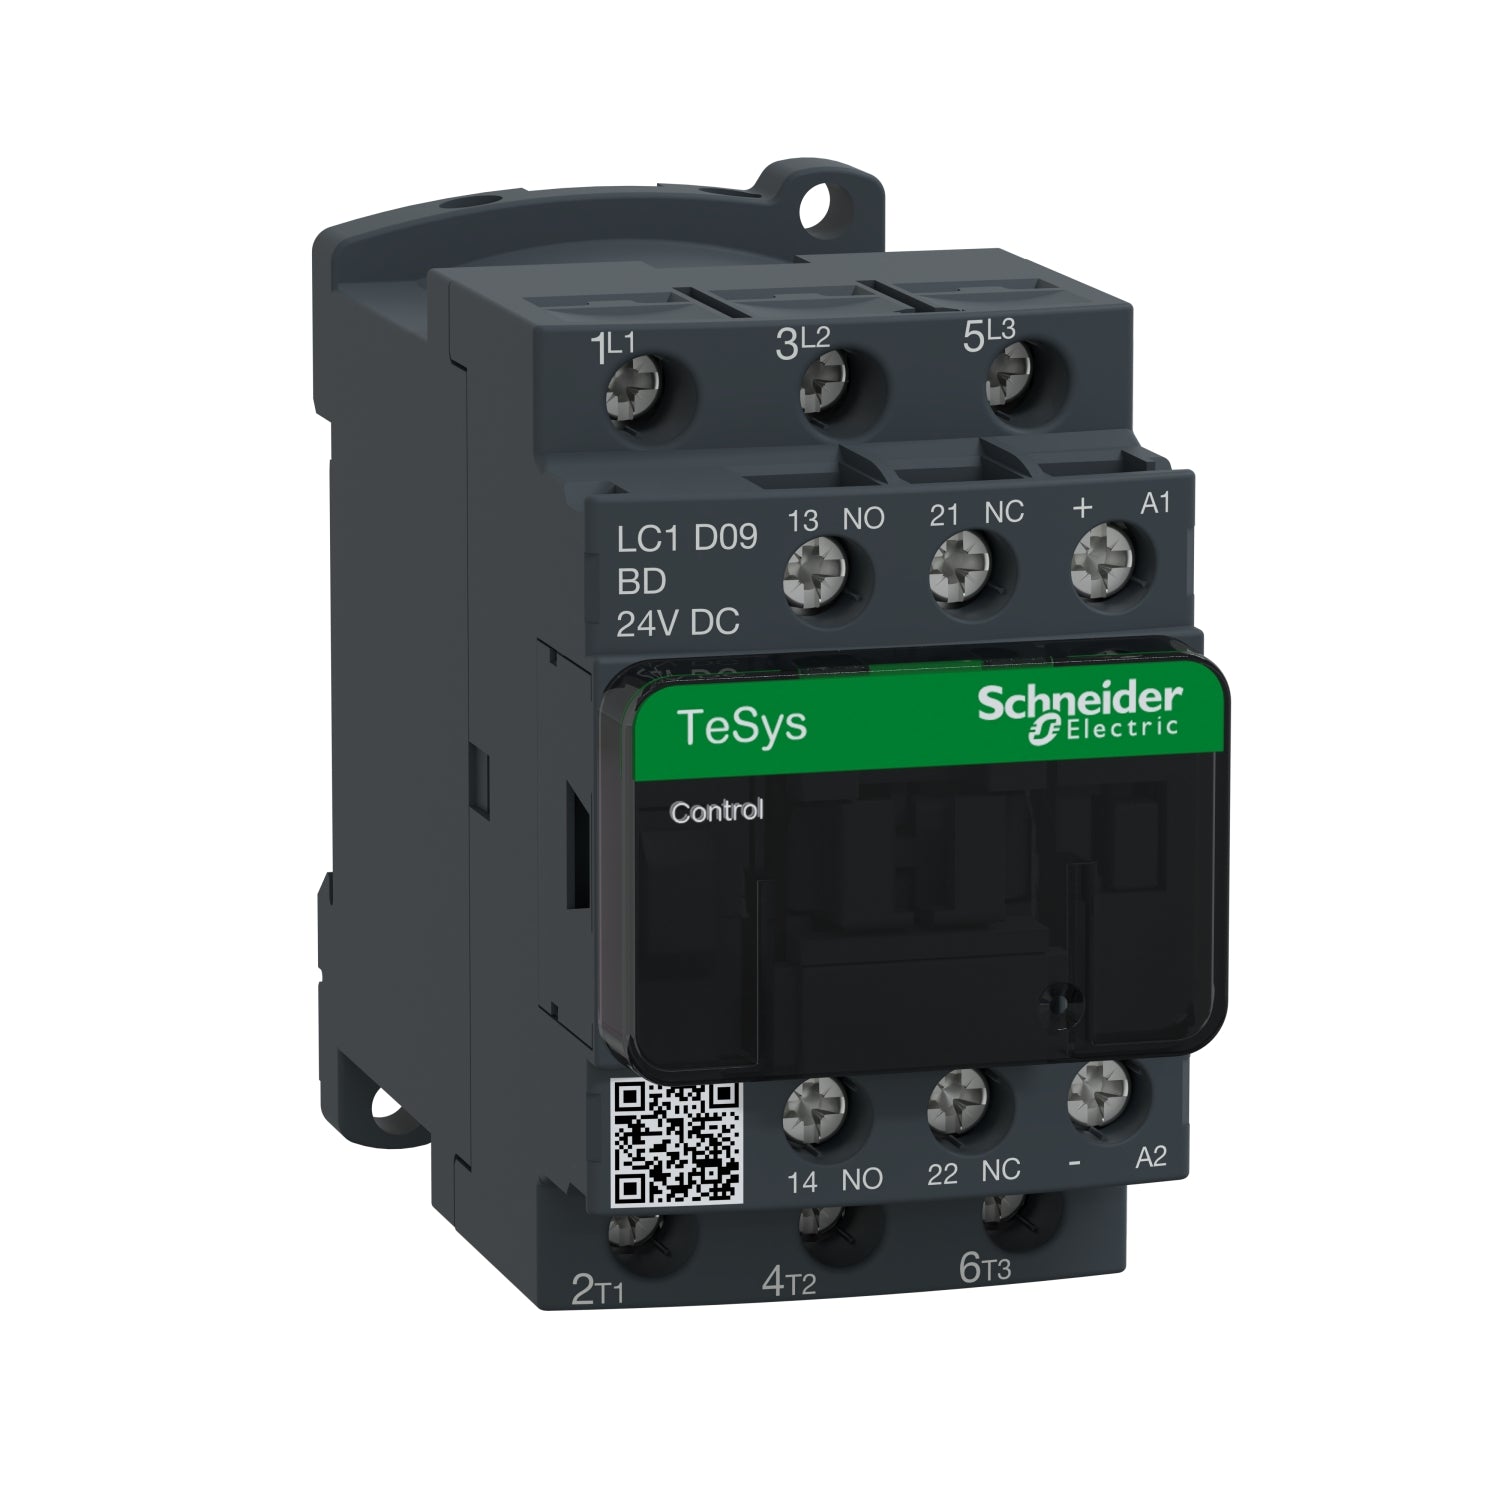 Schneider LC1D09BD TeSys D Contactor, 3P (3 NO) AC 3 9 A 24 V DC Coil Price in Pakistan